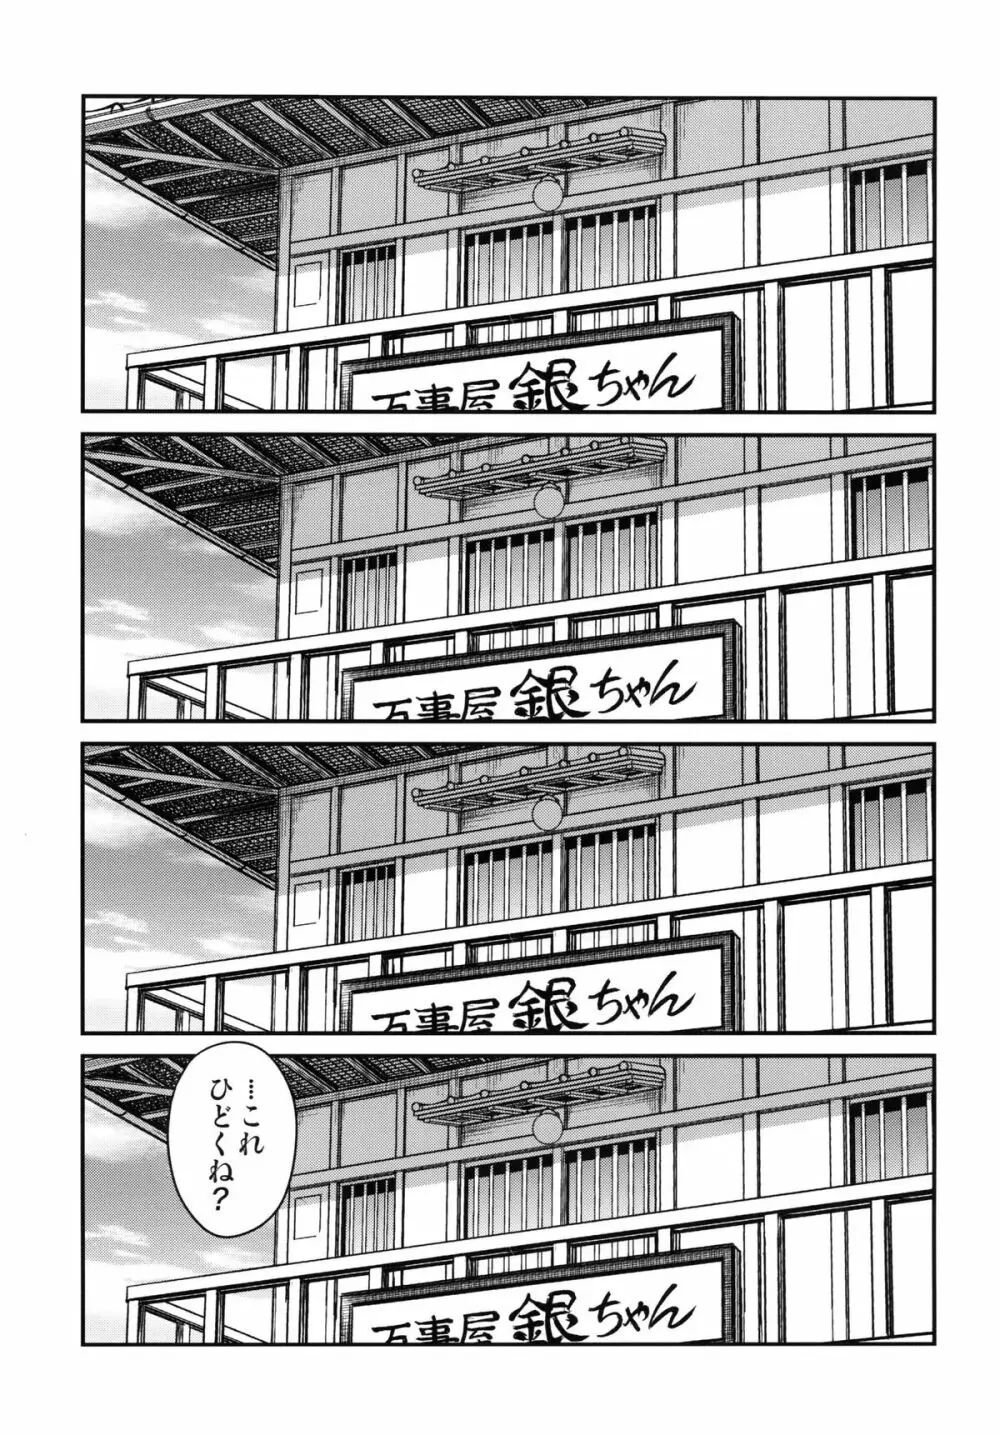 To LOVEる 月詠!! - page5